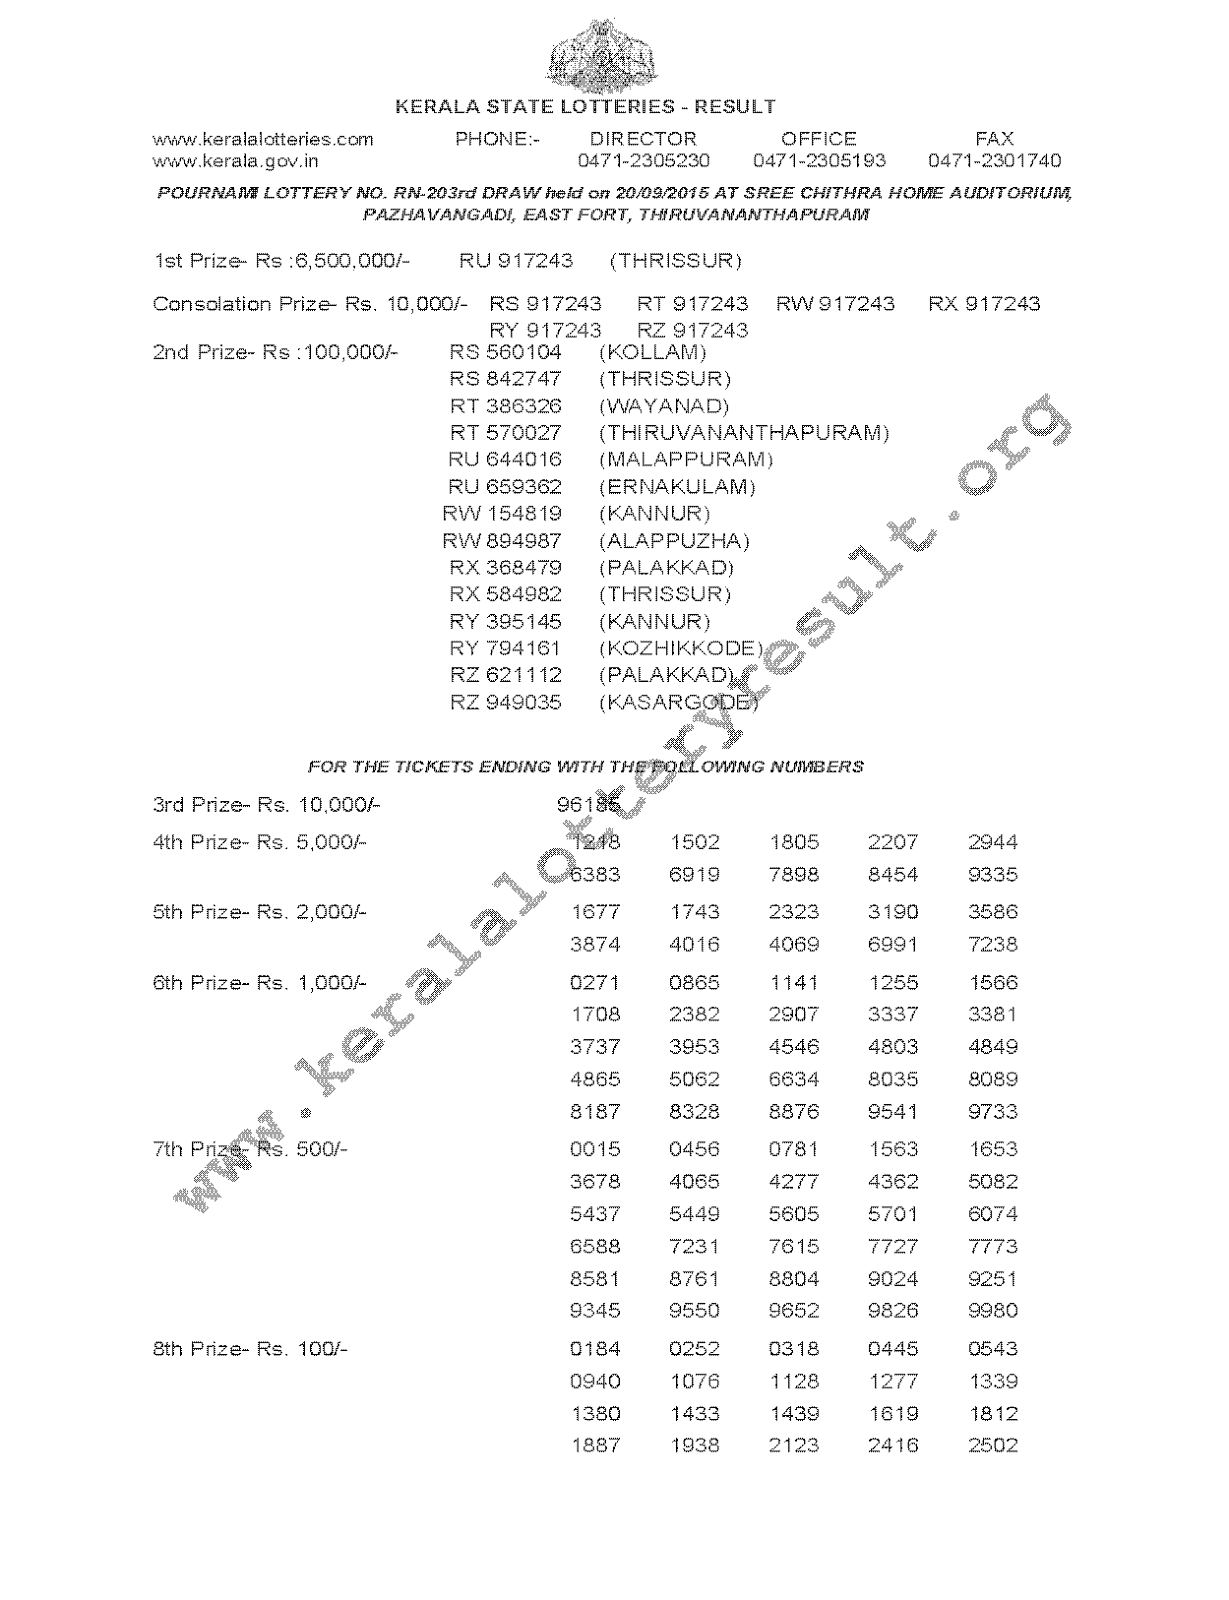 POURNAMI Lottery RN 203 Result 20-9-2015